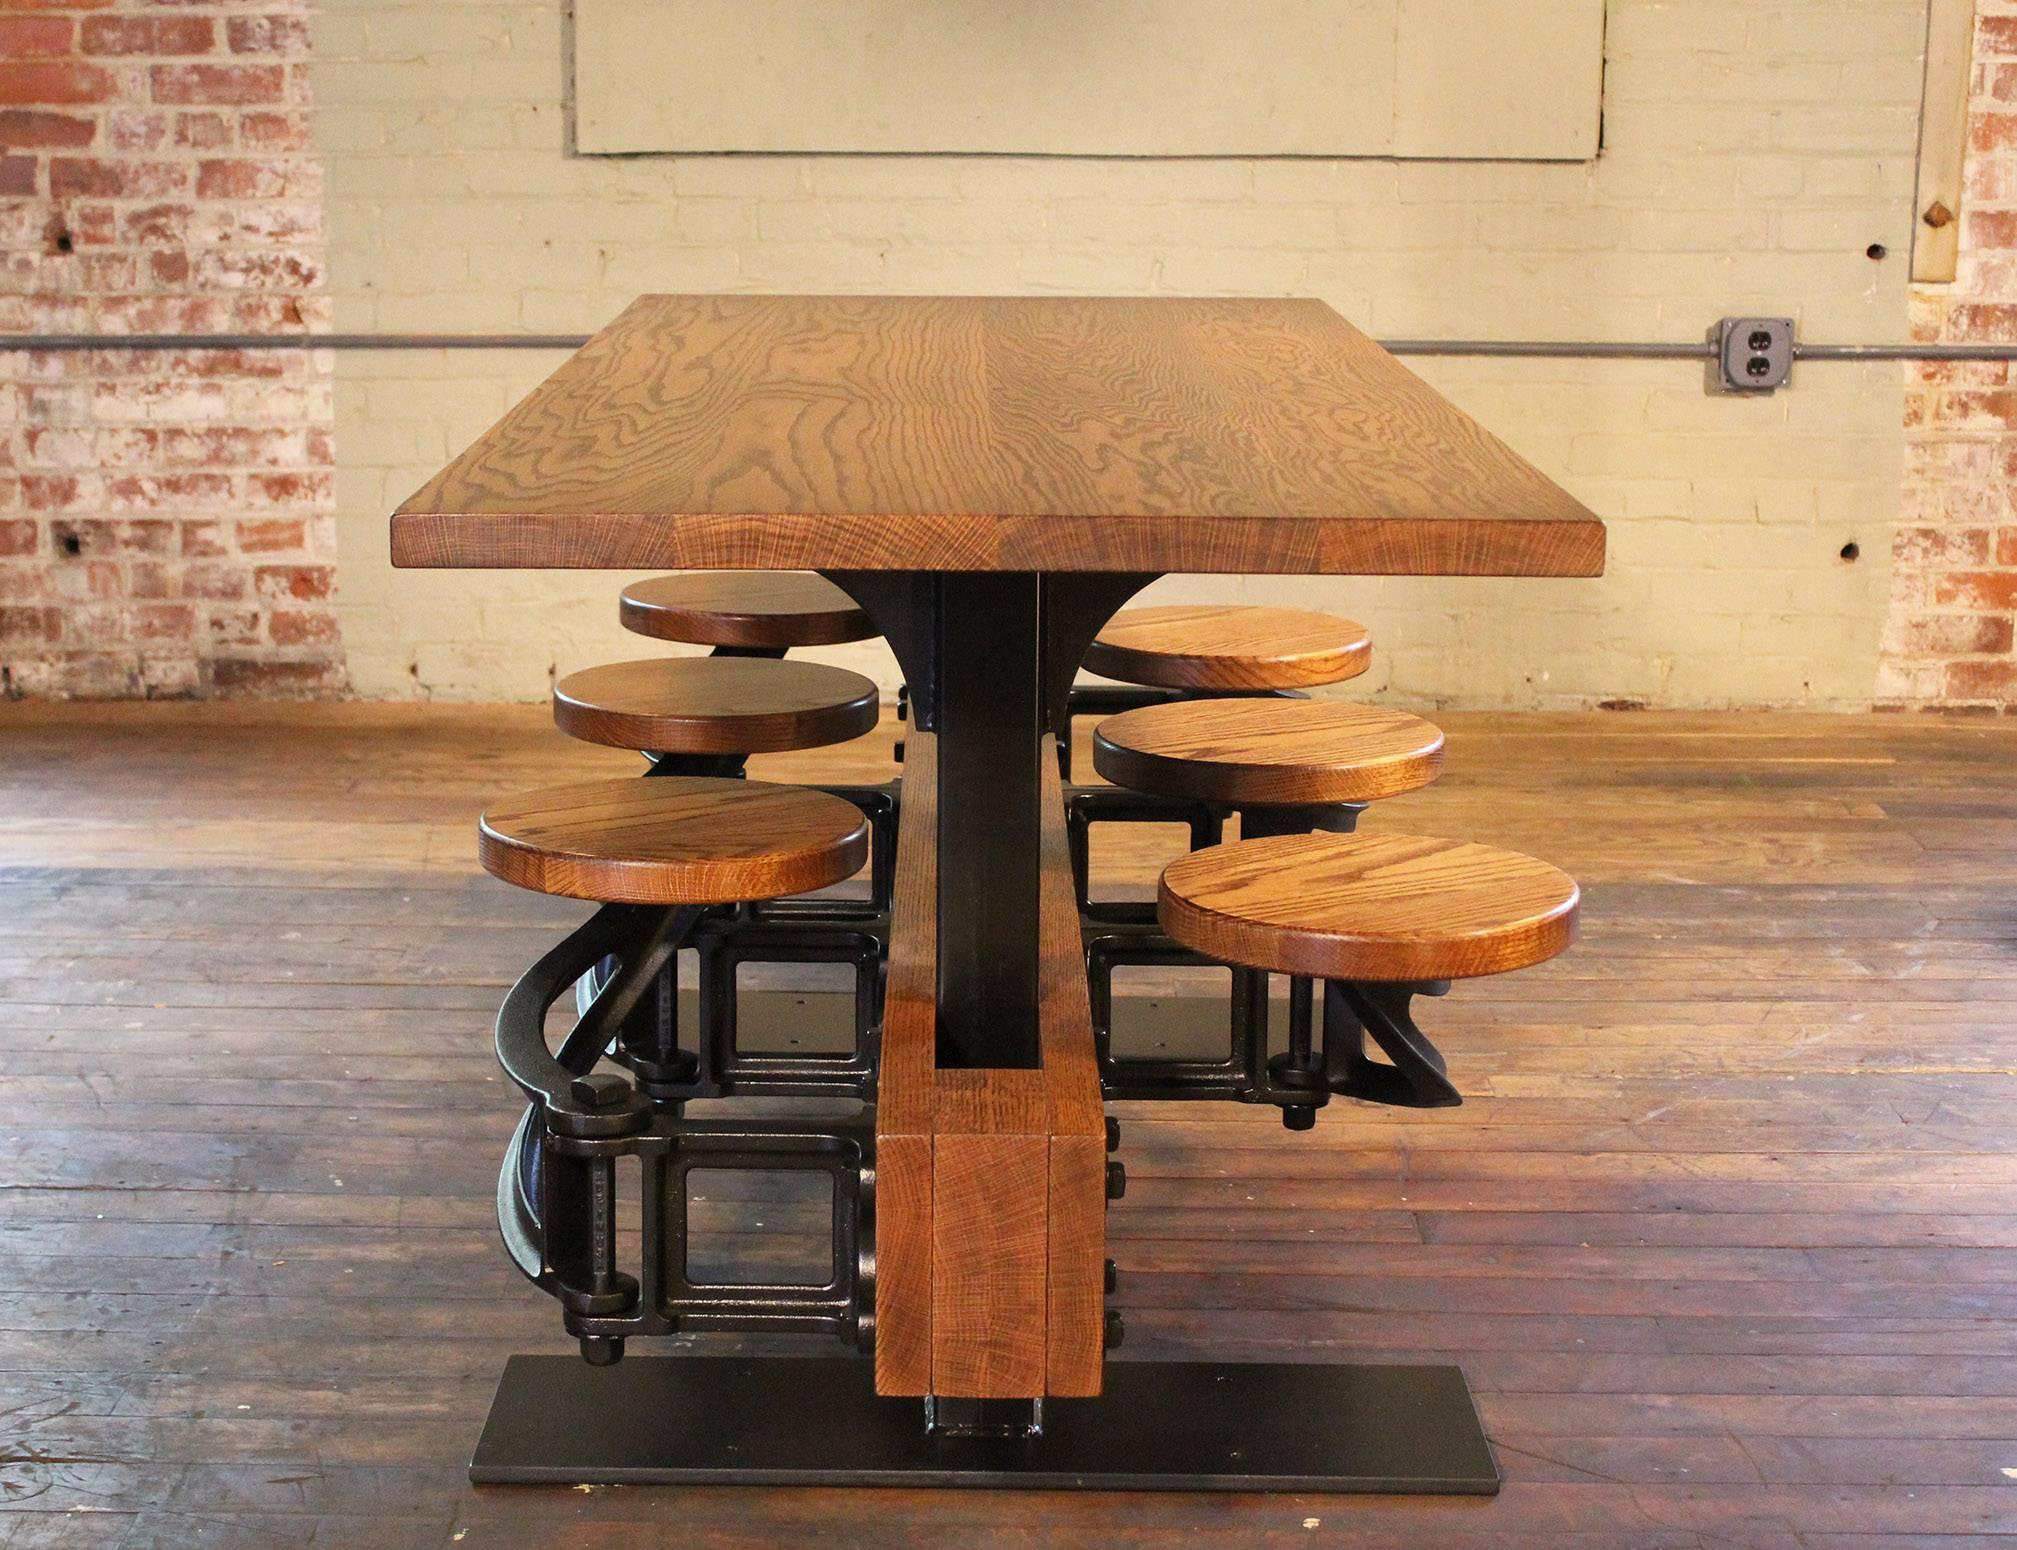 Industrial dining table in red oak with built in attached cast iron swing out seats. A great space saving option for use in the kitchen as a dinner or breakfast table, or in a cafe or restaurant. Tables can be linked together or built up to 24' in